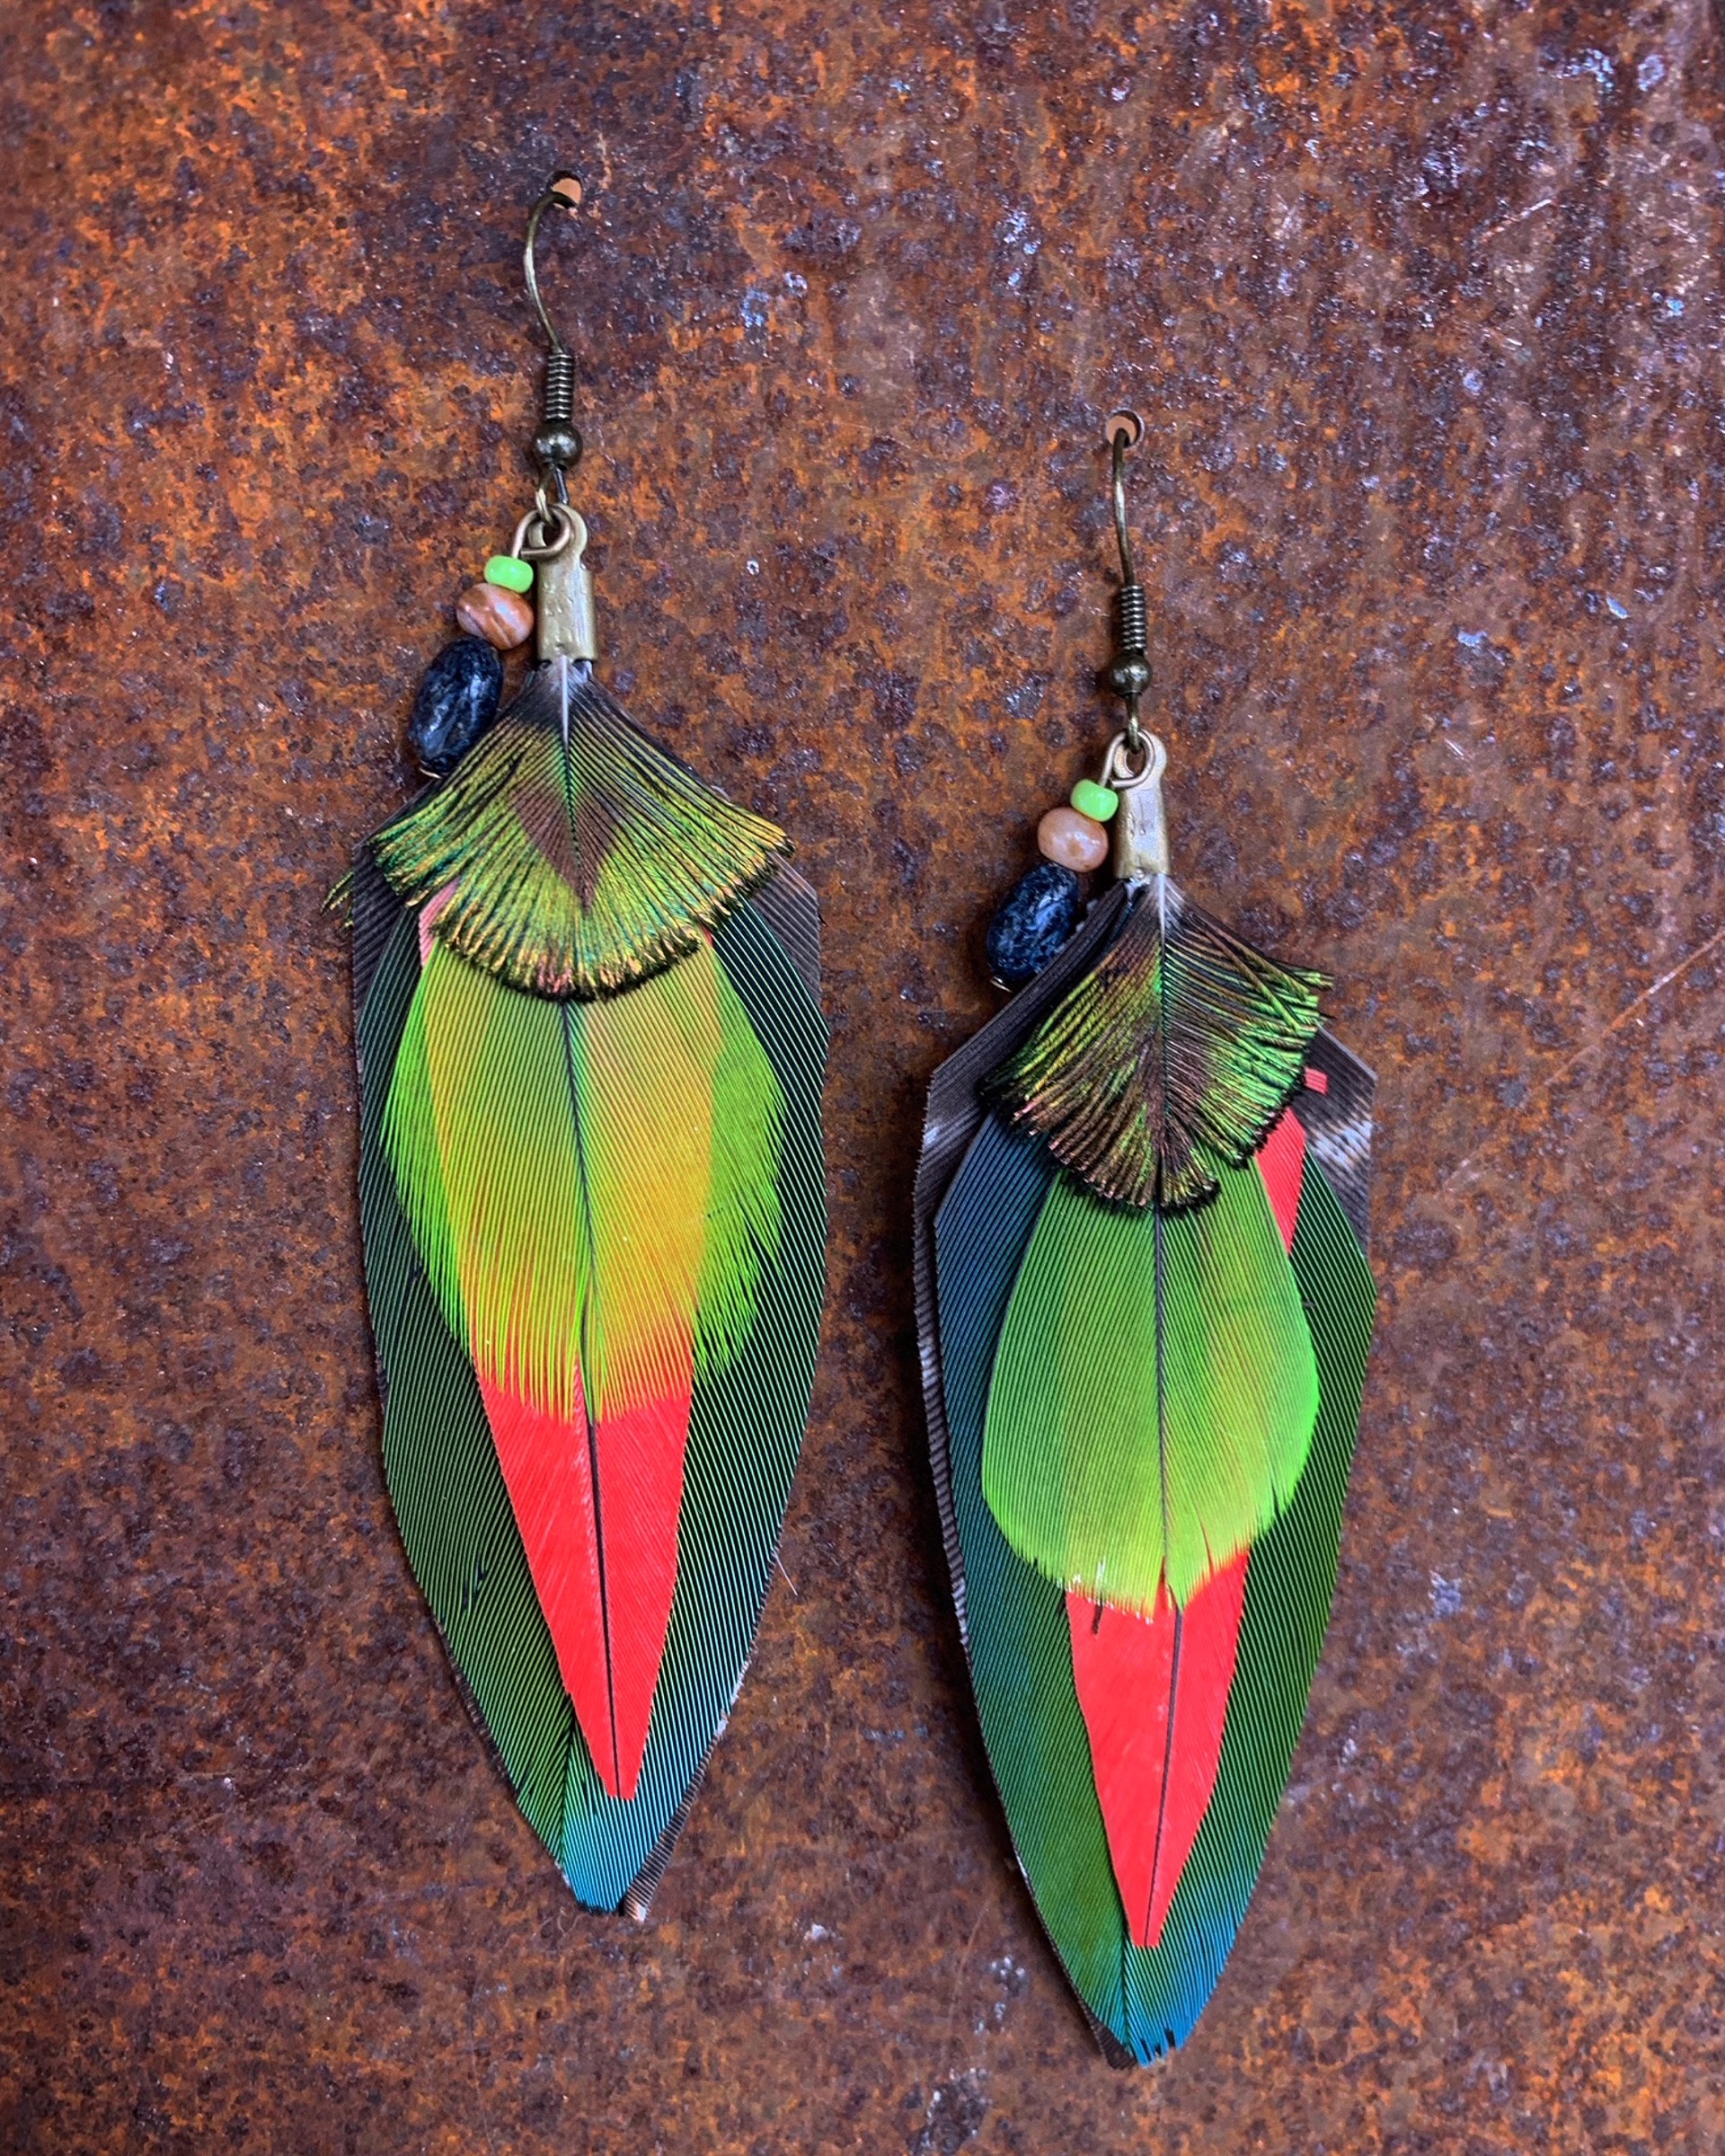 K766 Ethically Sourced Parrot Earrings by Kelly Ormsby